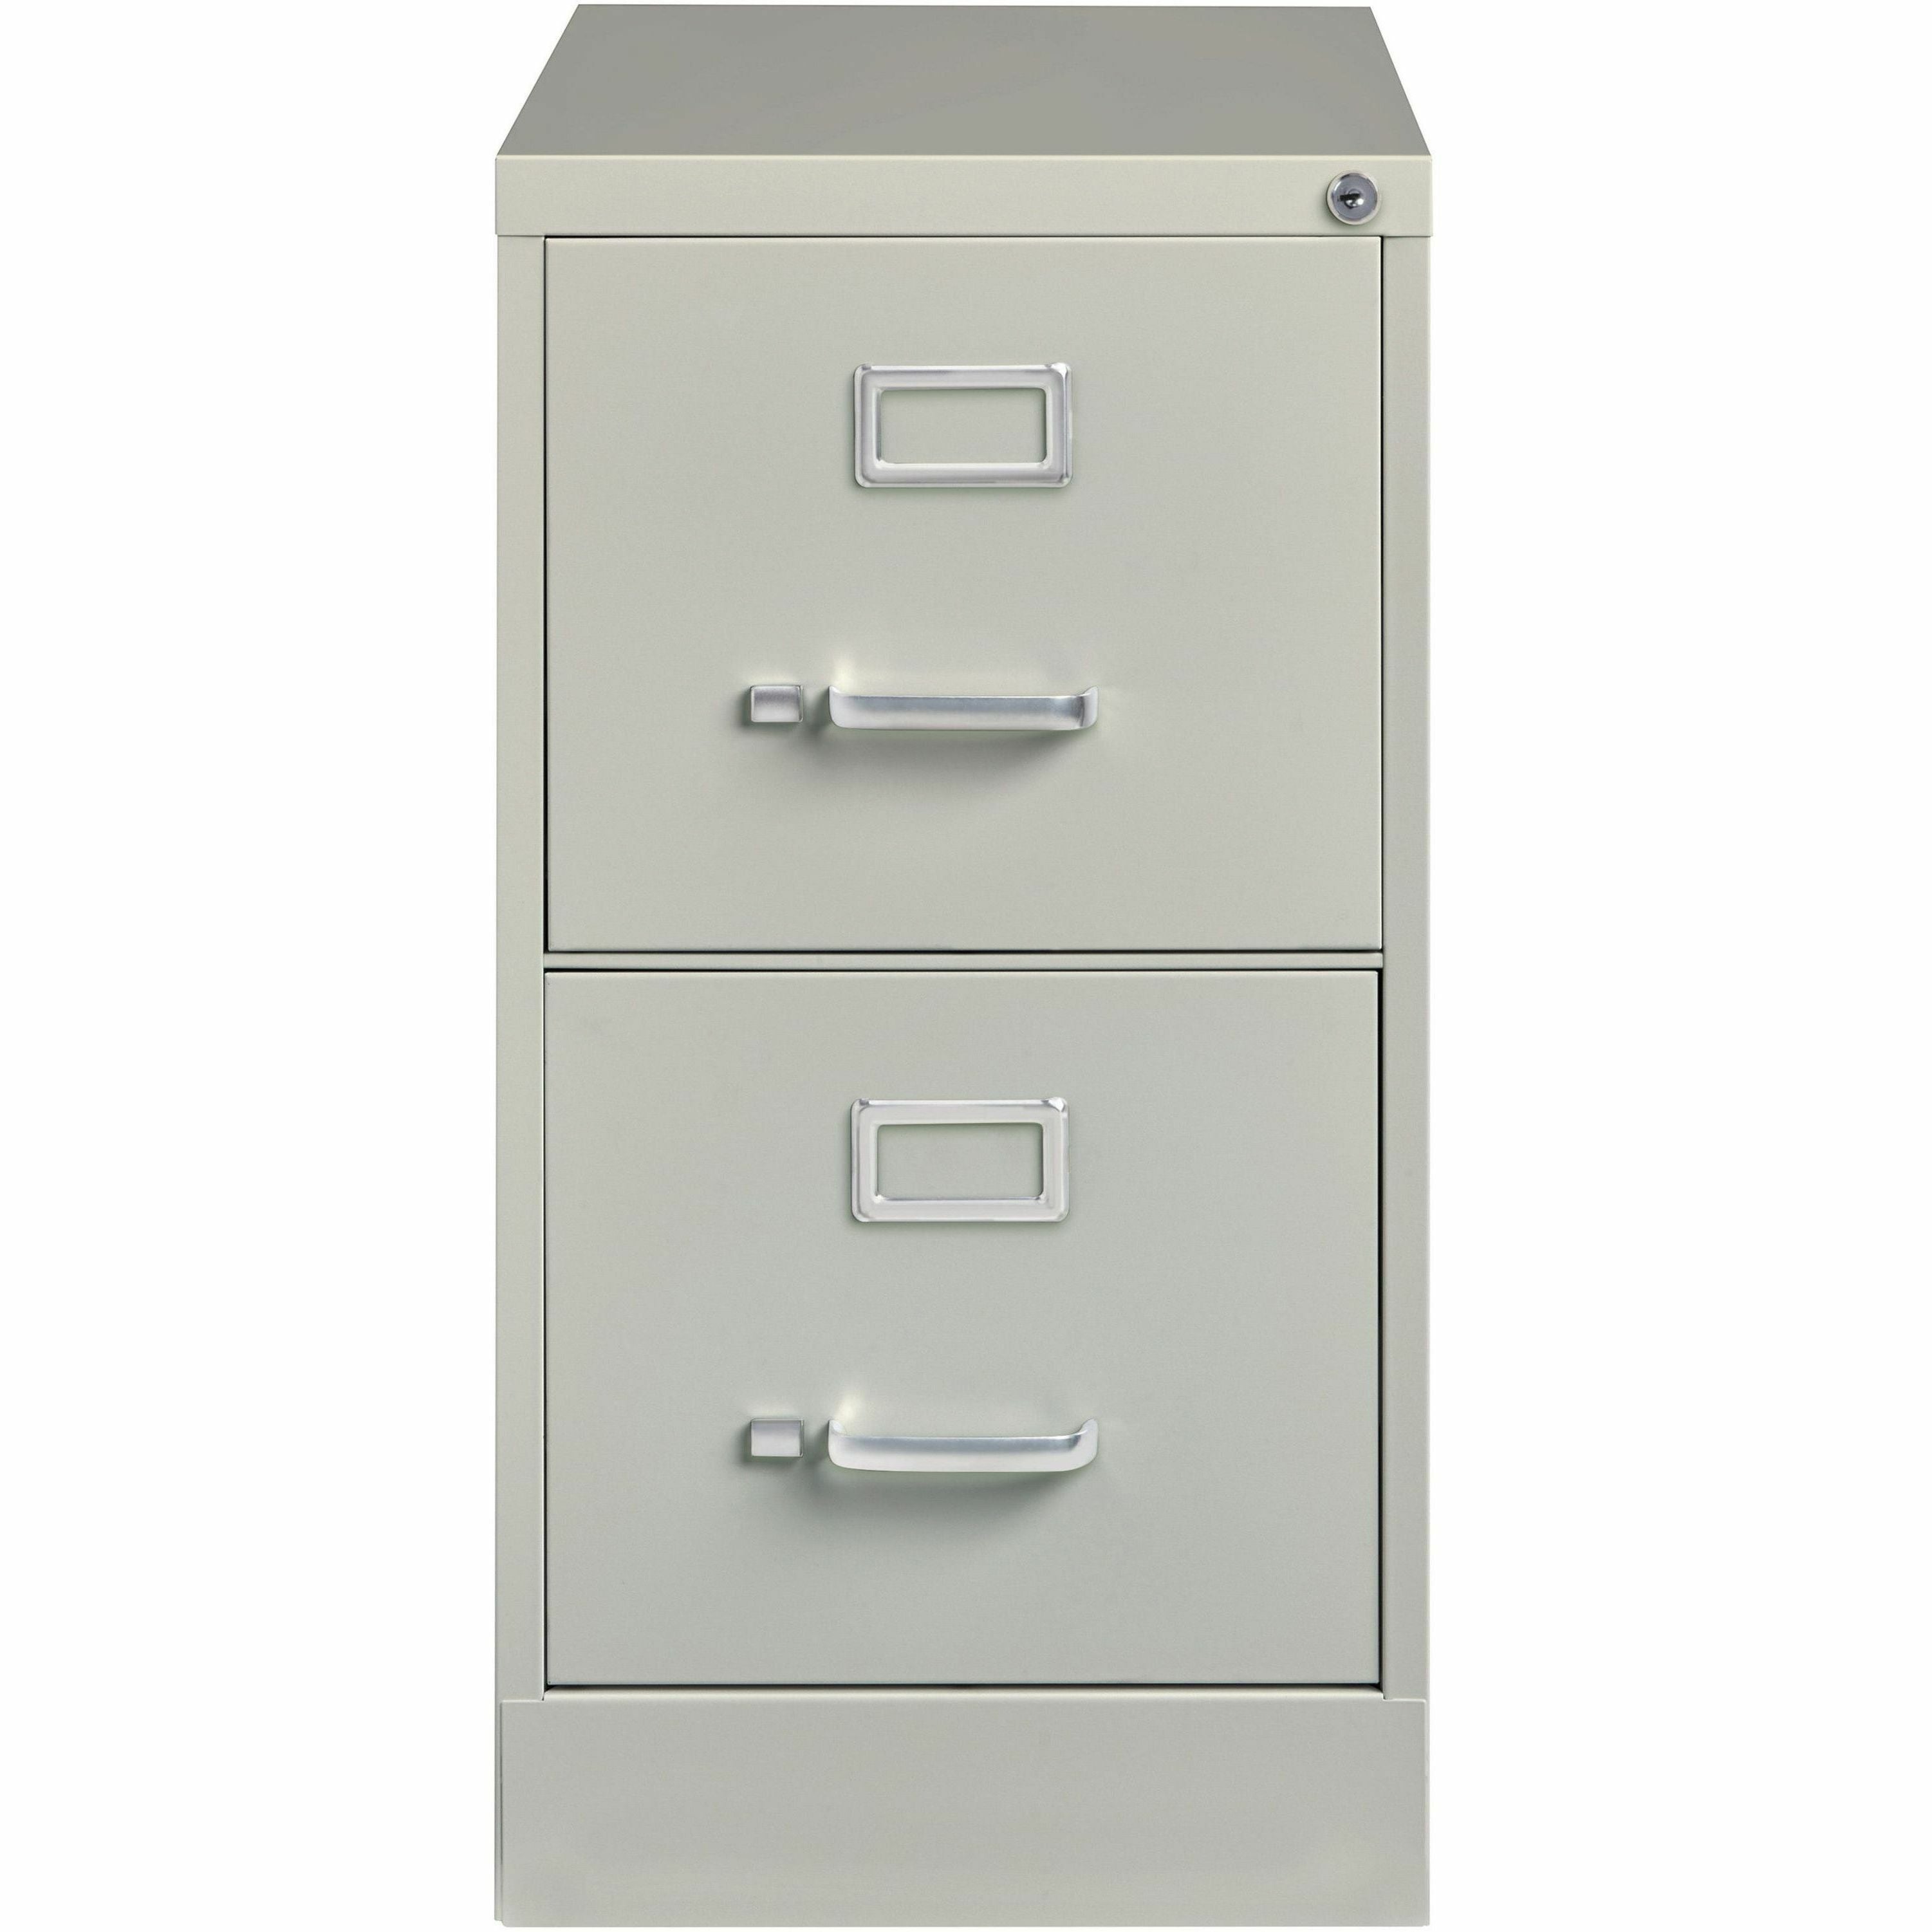 Lorell Fortress Series 25" Commercial-Grade Vertical File Cabinet - 15" x 25" x 28.4" - 2 x Drawer(s) for File - Letter - Vertical - Security Lock, Ball-bearing Suspension, Heavy Duty - Light Gray - Steel - Recycled - 